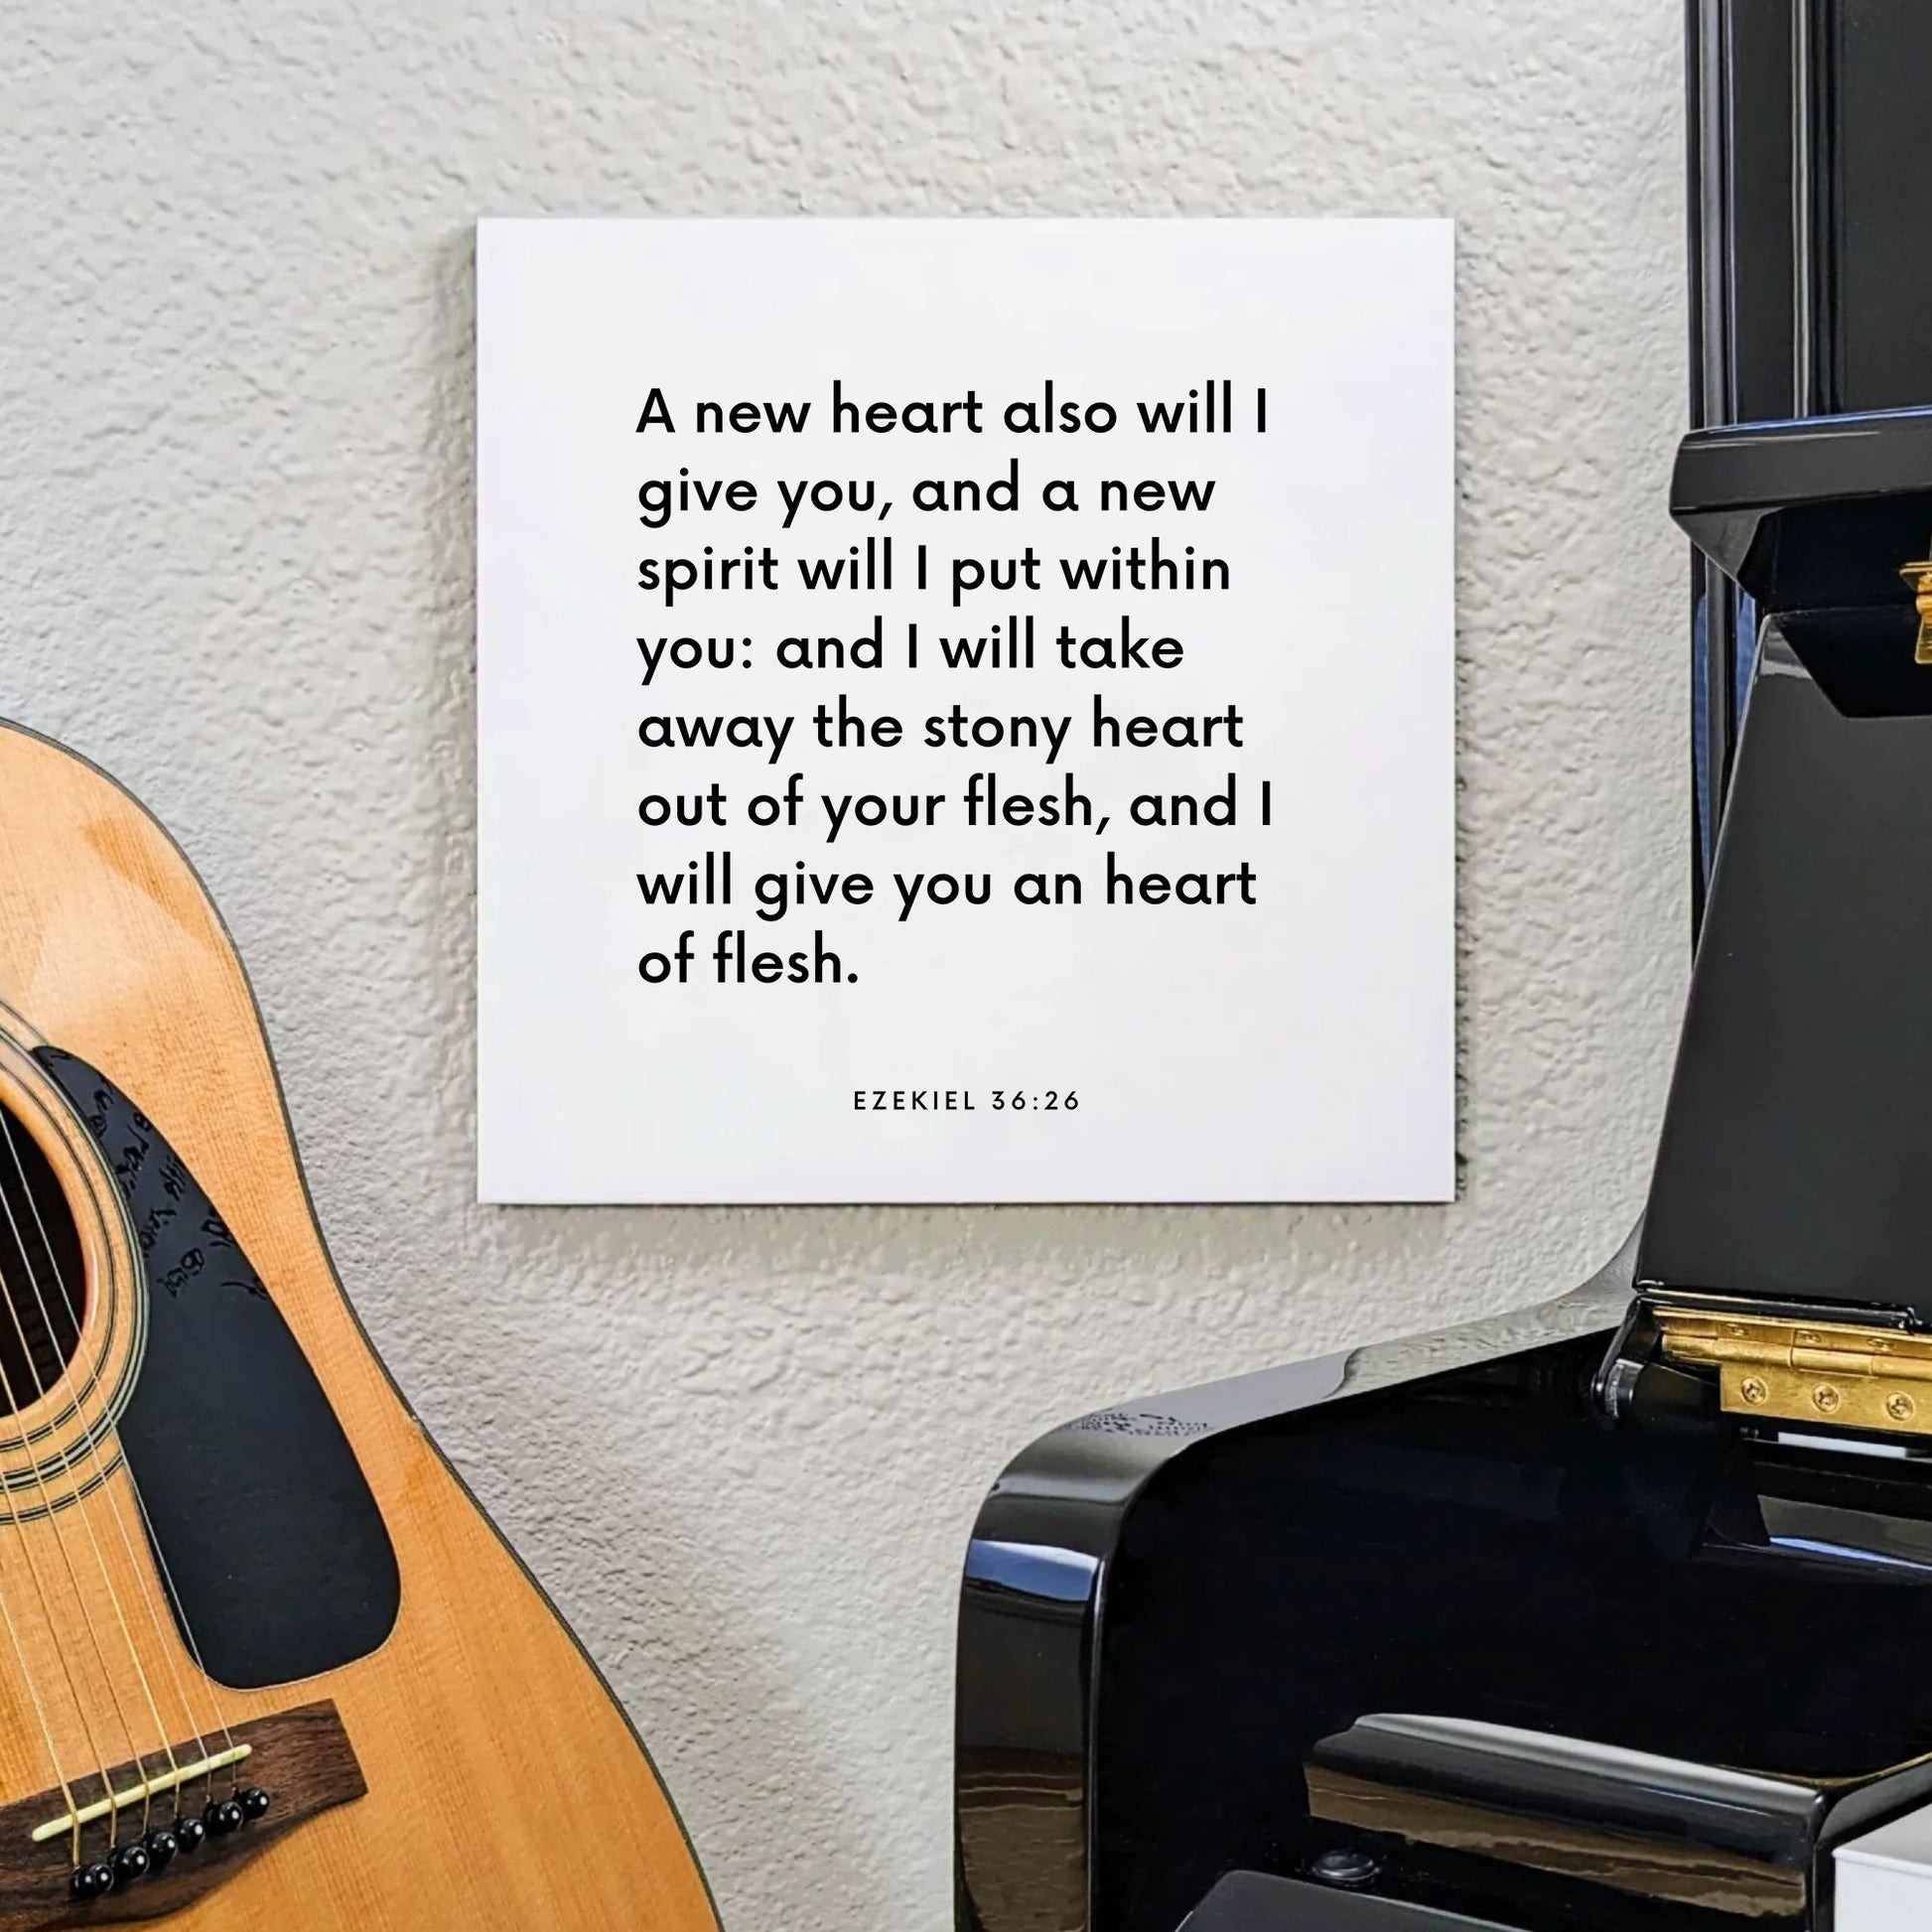 Music mouting of the scripture tile for Ezekiel 36:26 - "A new heart also will I give you, and a new spirit"